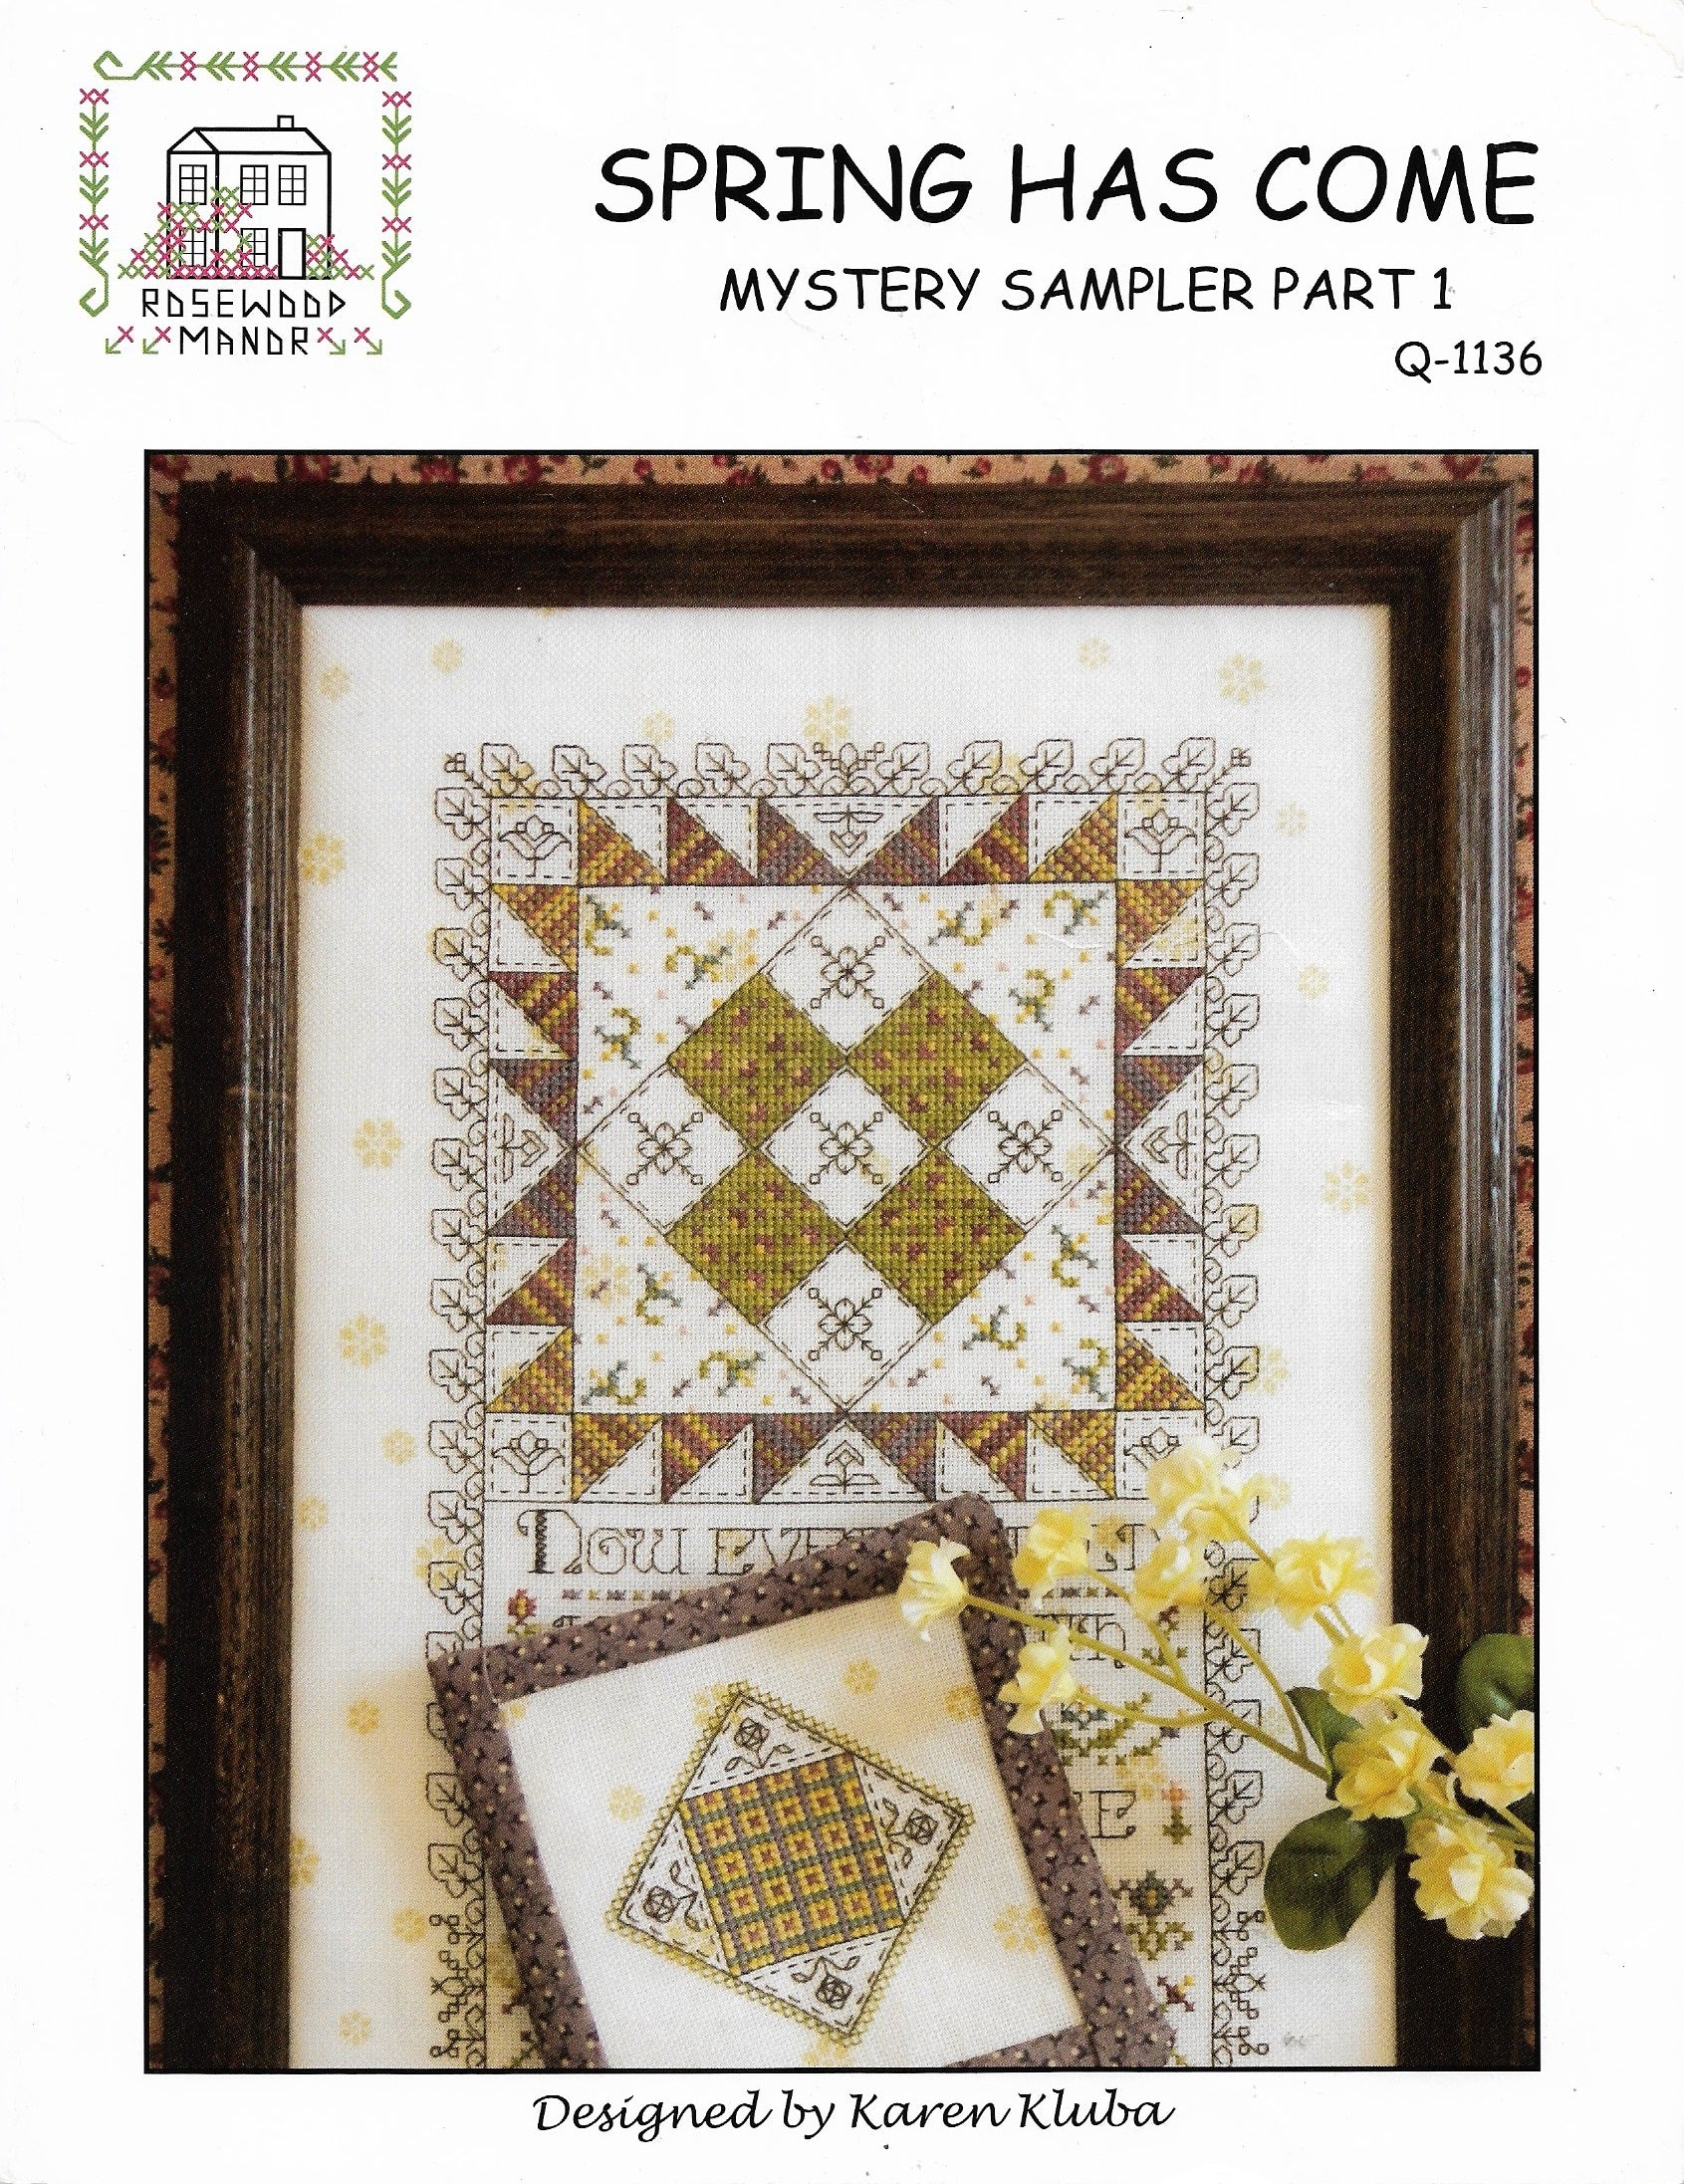 Rosewood Manor Spring Has Come Mystery Sampler (3 parts) Q-1136 cross stitch pattern